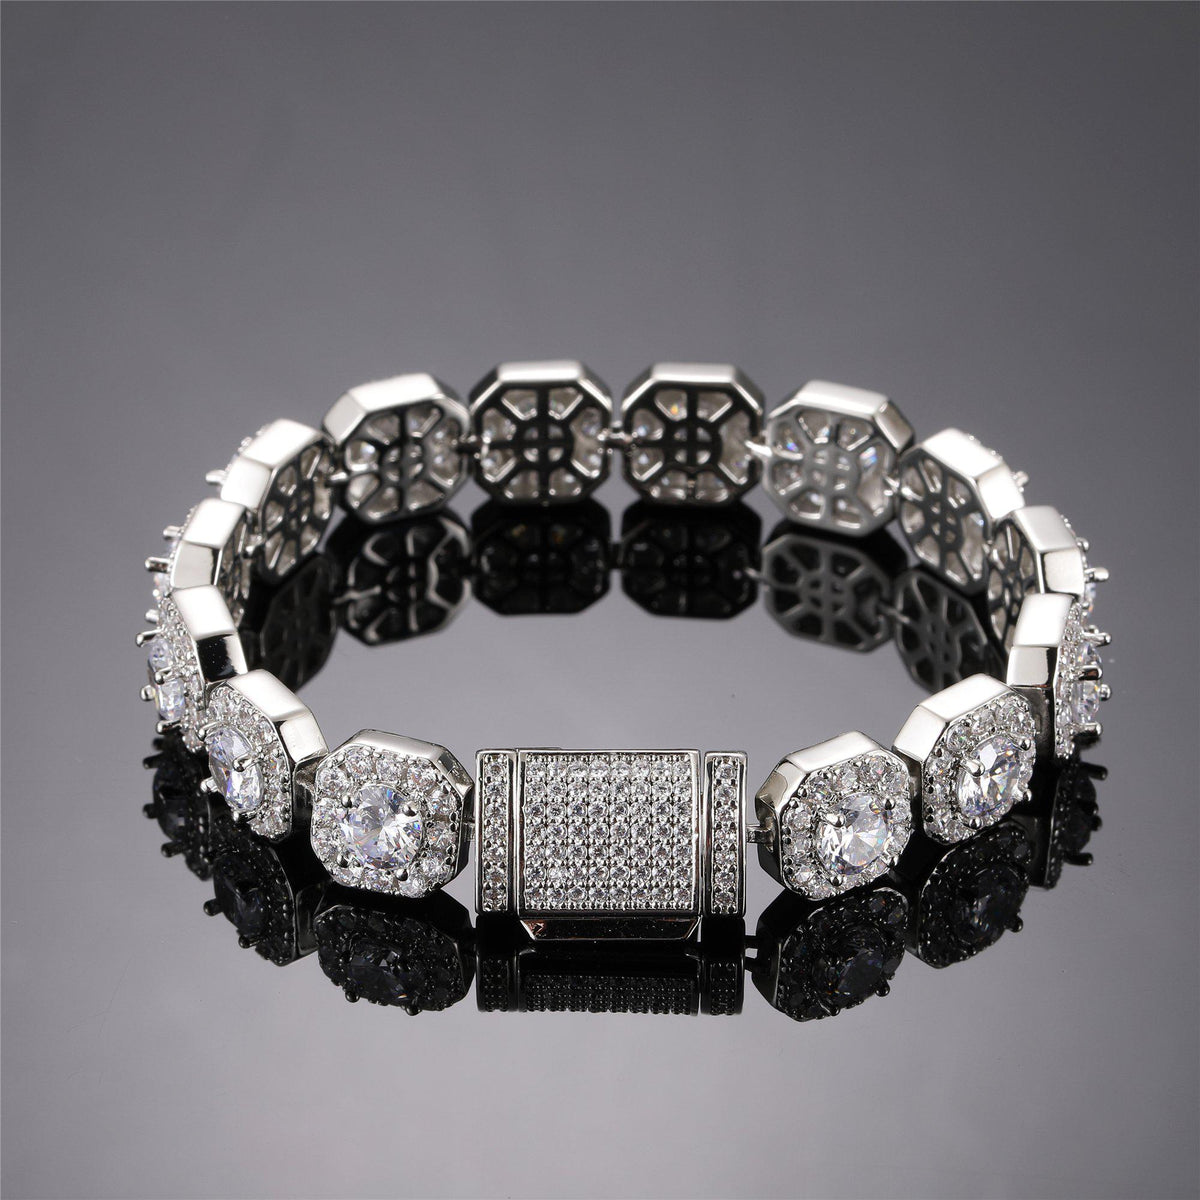 ICED OUT - 10mm Clustered Tennis Bracelet - Icezzle